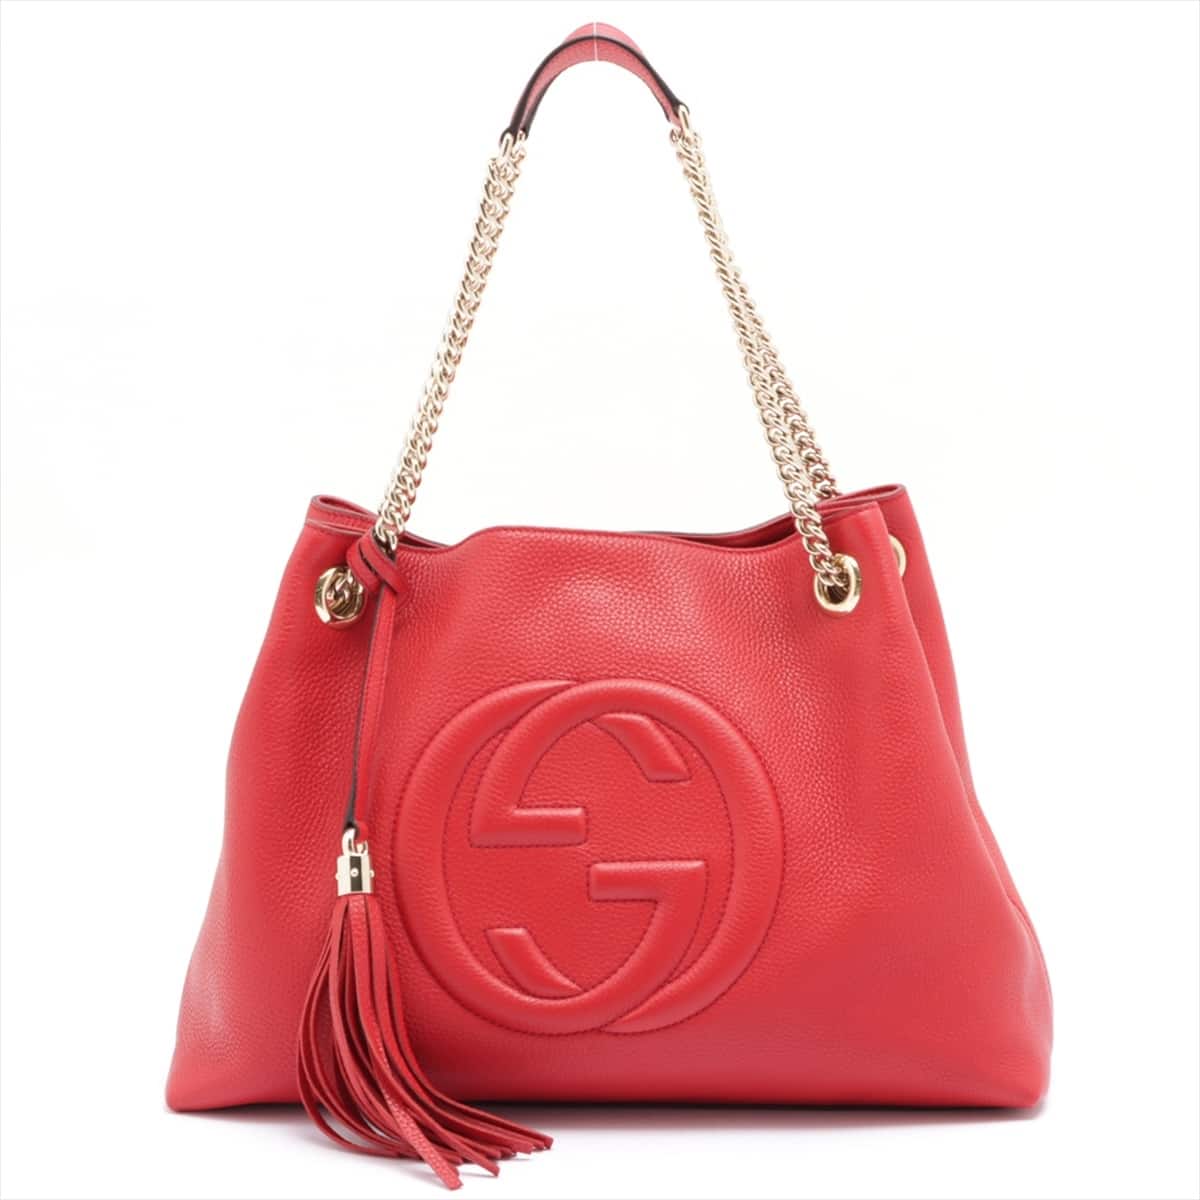 Gucci Soho Leather Chain shoulder bag Red 536196